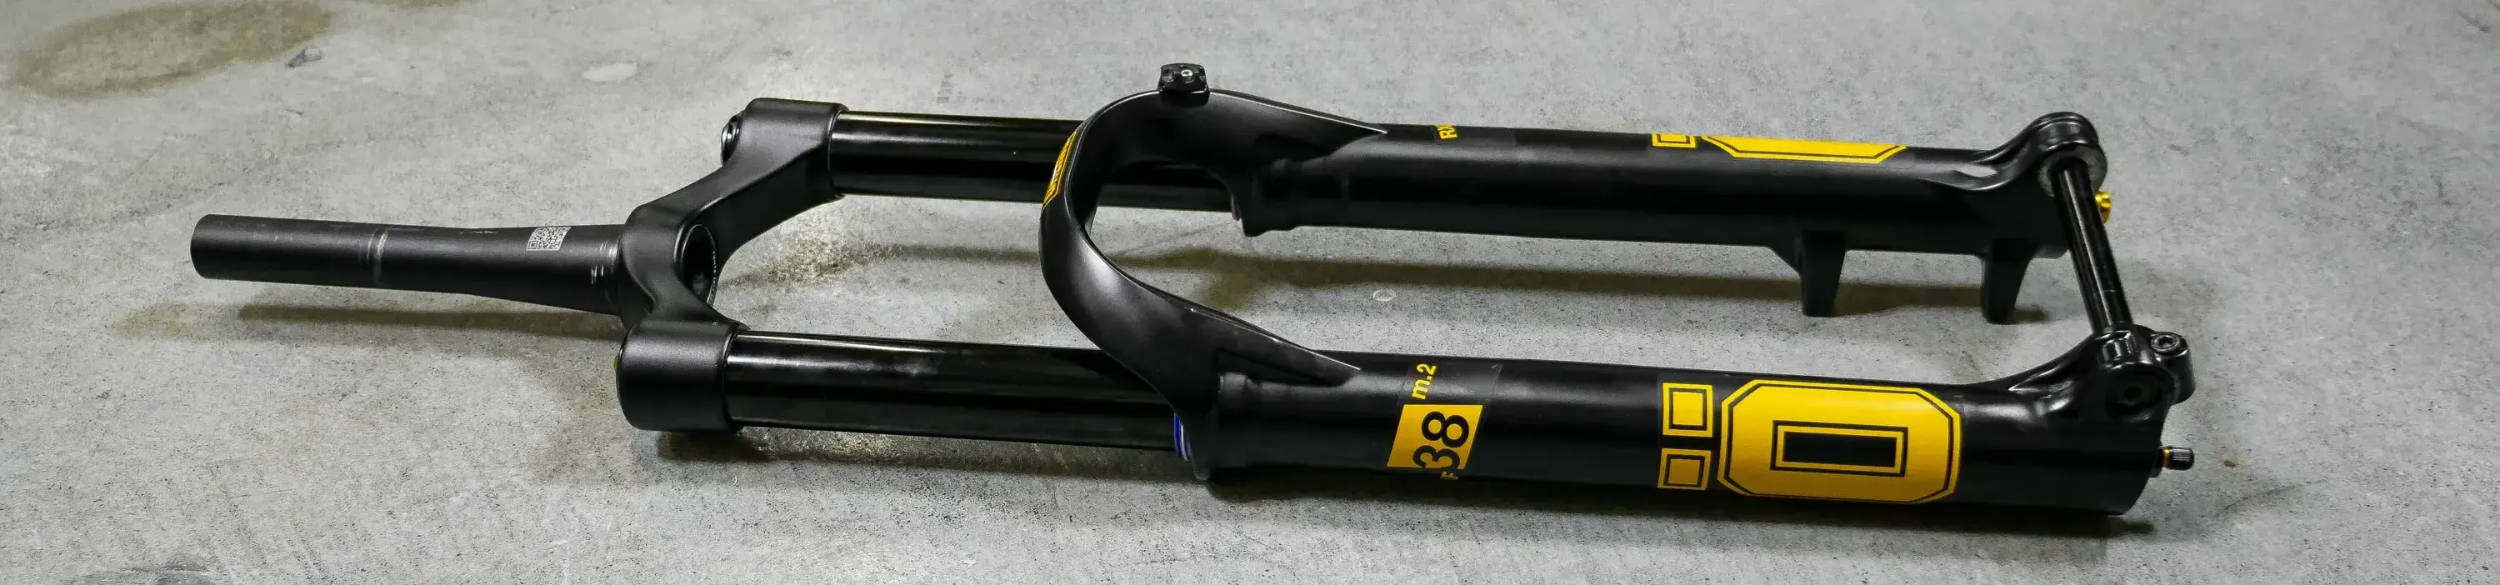 ohlins RXF38 Fork laying on concrete floor